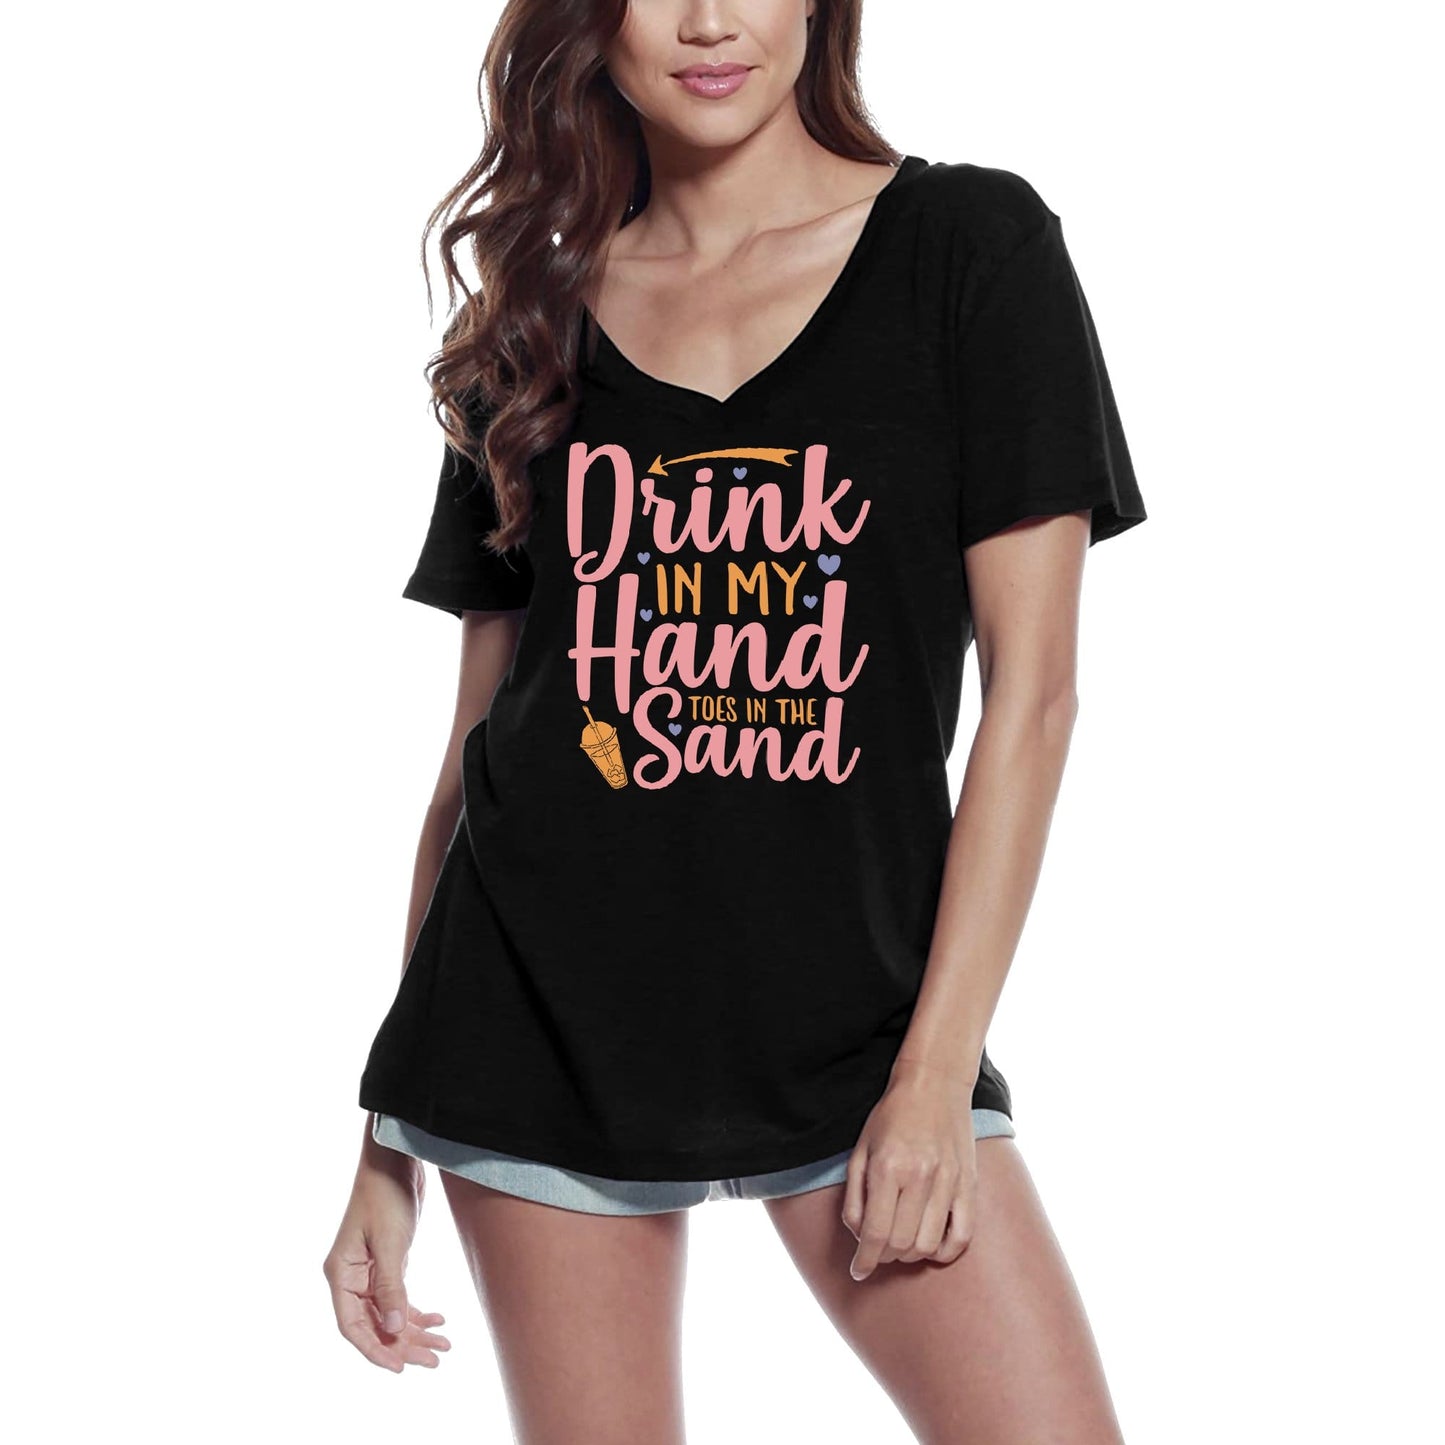 ULTRABASIC Women's T-Shirt Drink In My Hand Toes In the Sand - Short Sleeve Tee Shirt Gift Tops